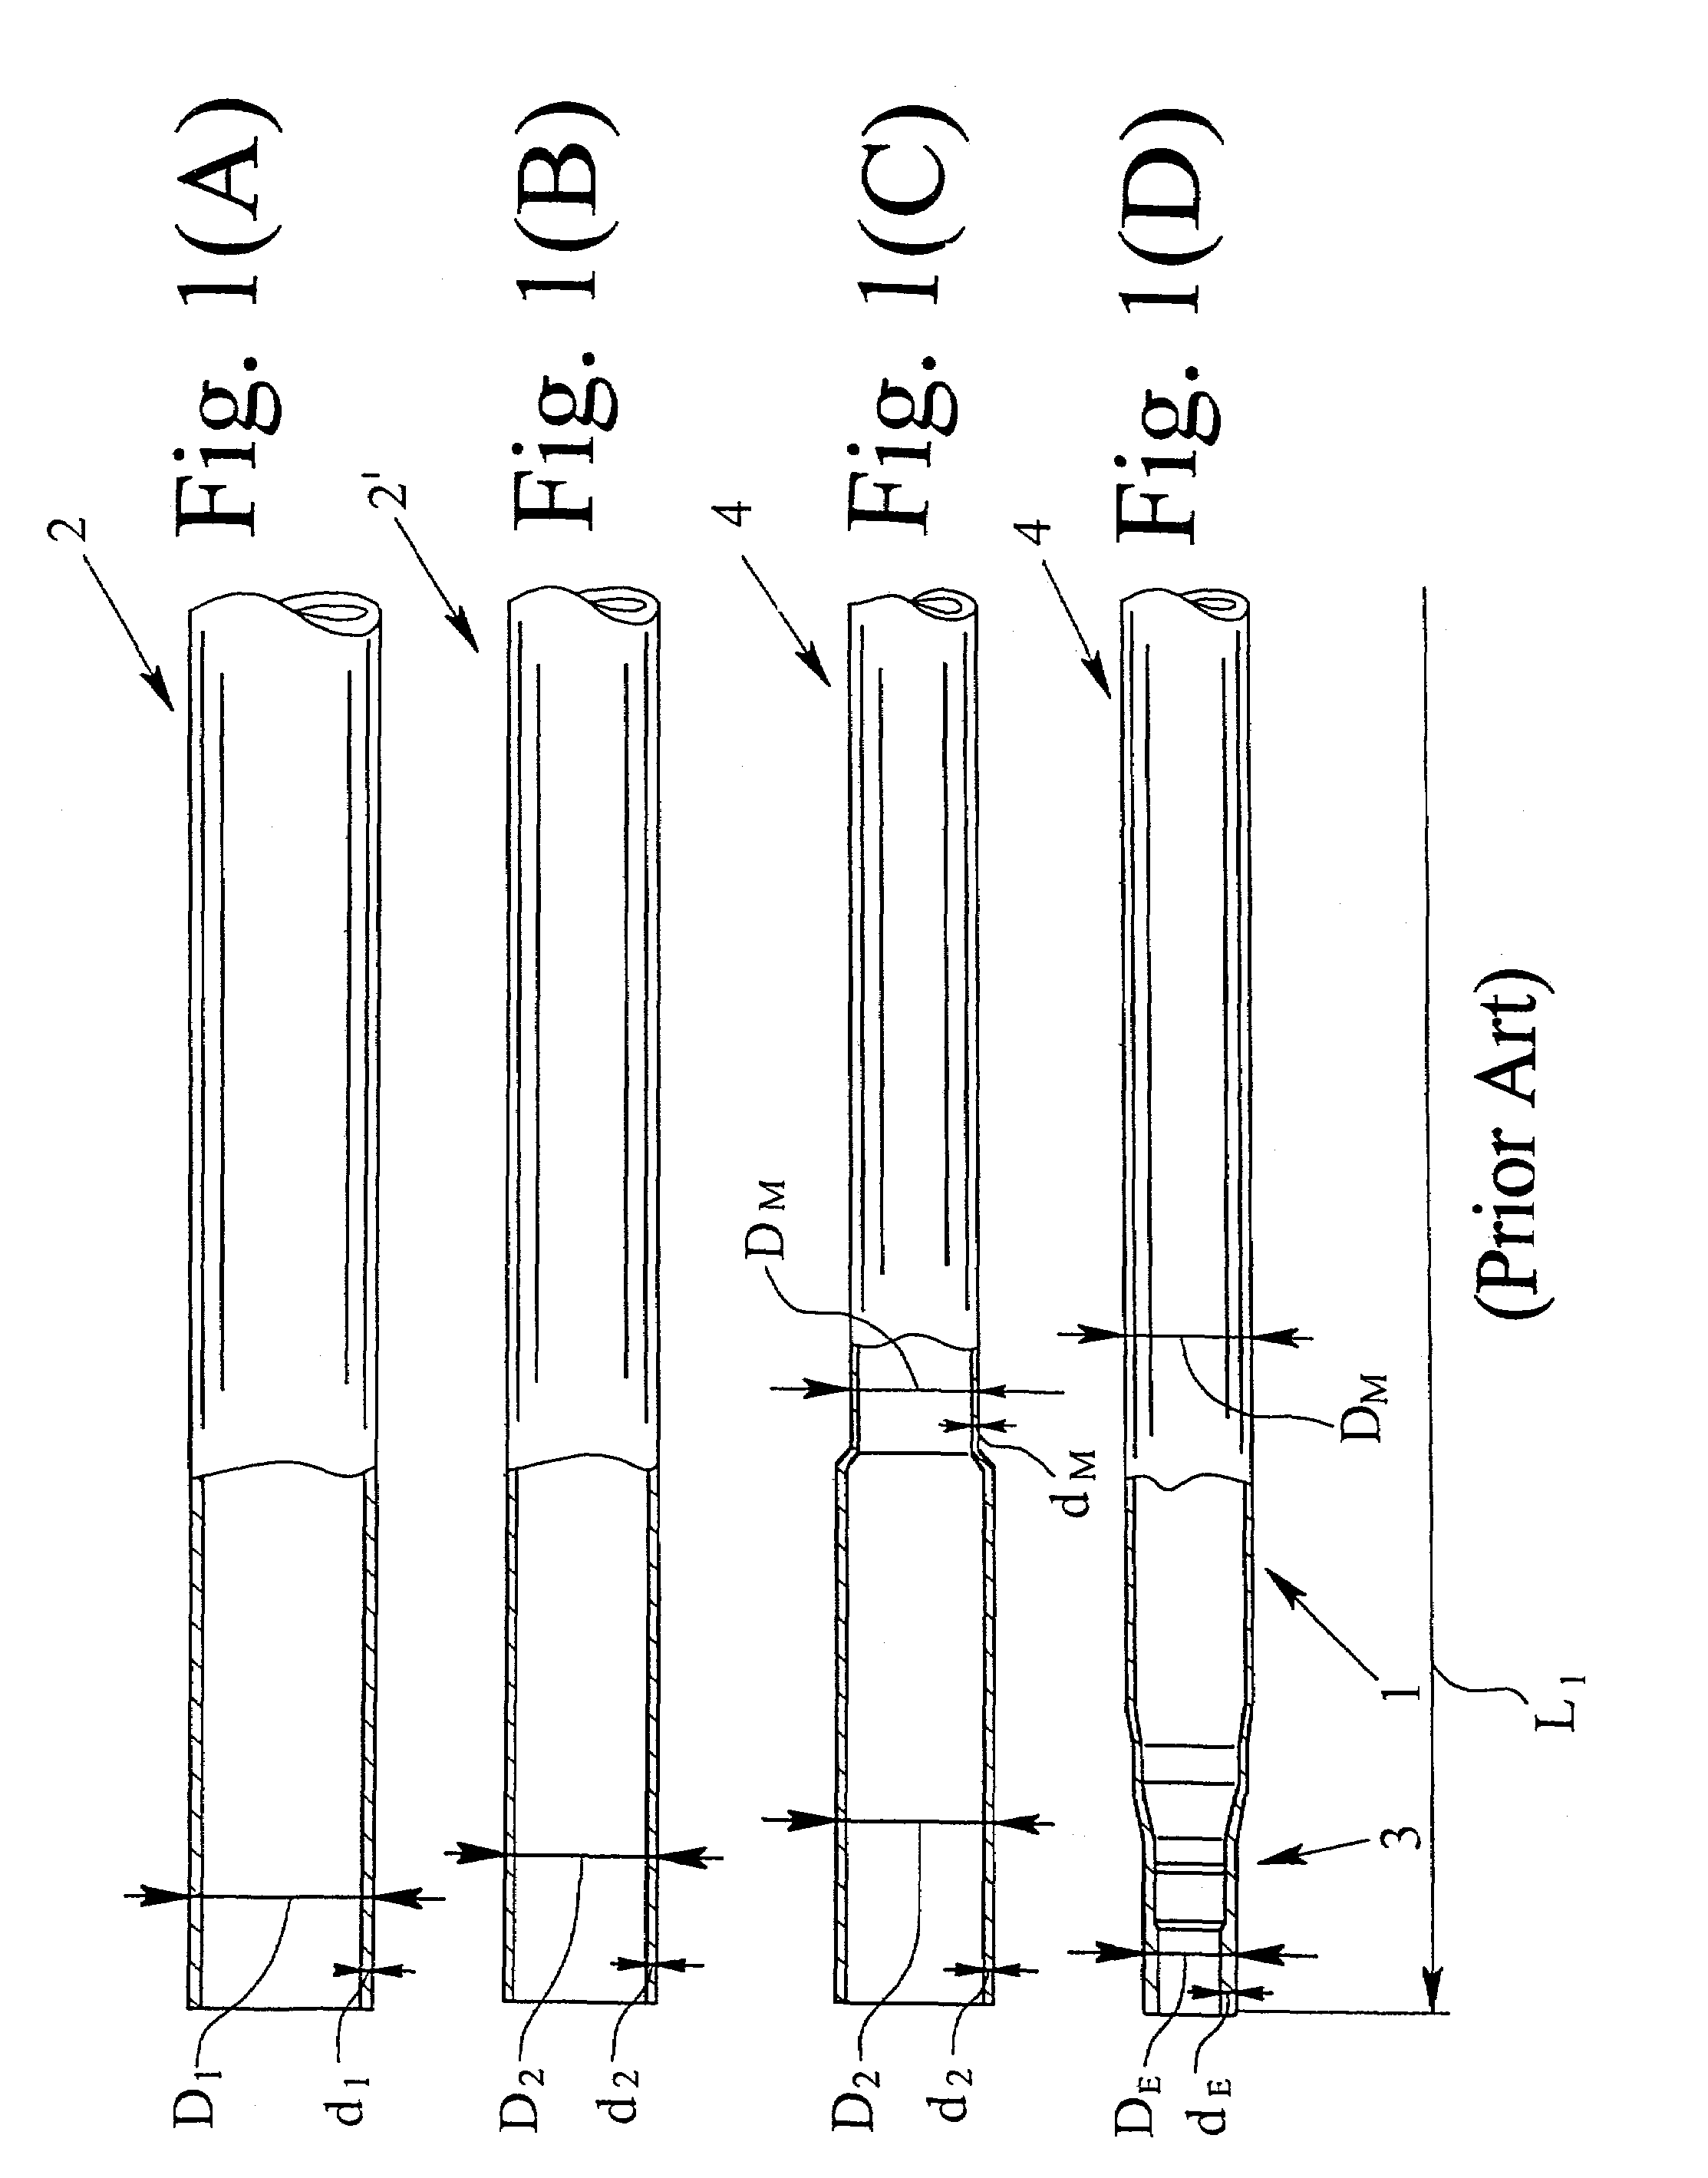 Process for producing rotationally symmetrical components